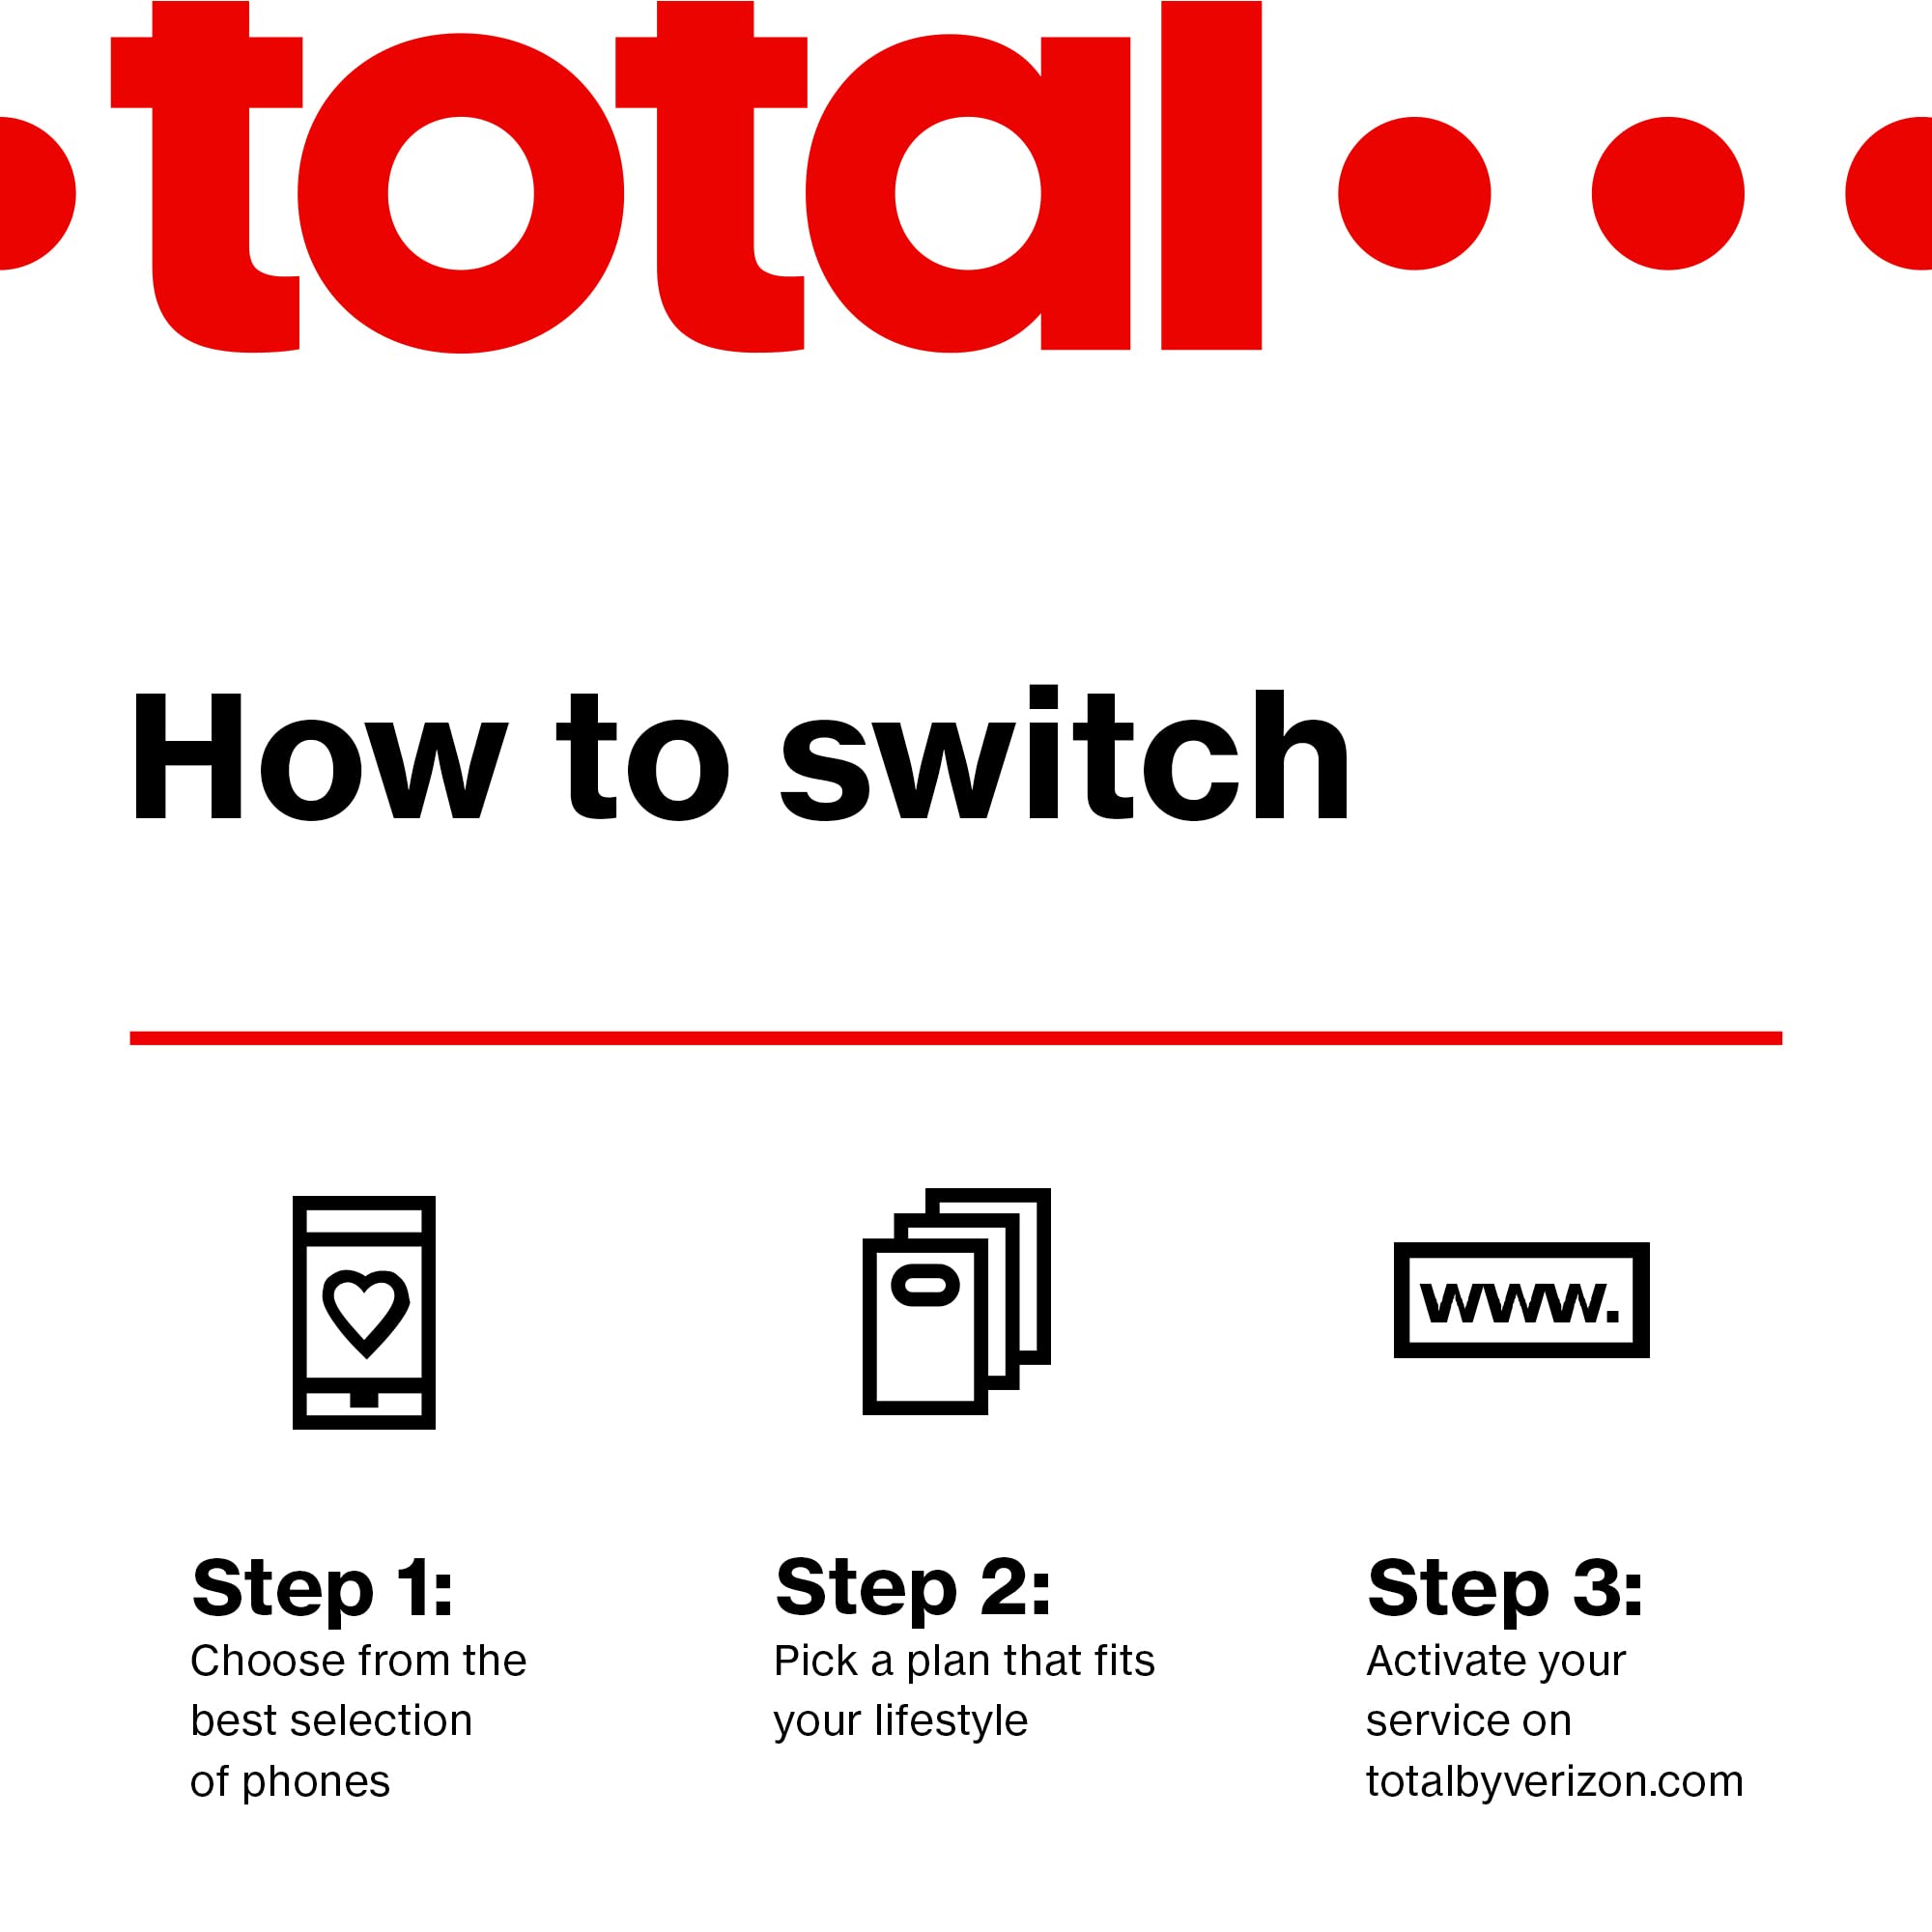 Total by Verizon $60 - Unlimited Talk and Text, 5G UWB Data, HS and Disney Plus/Monthly